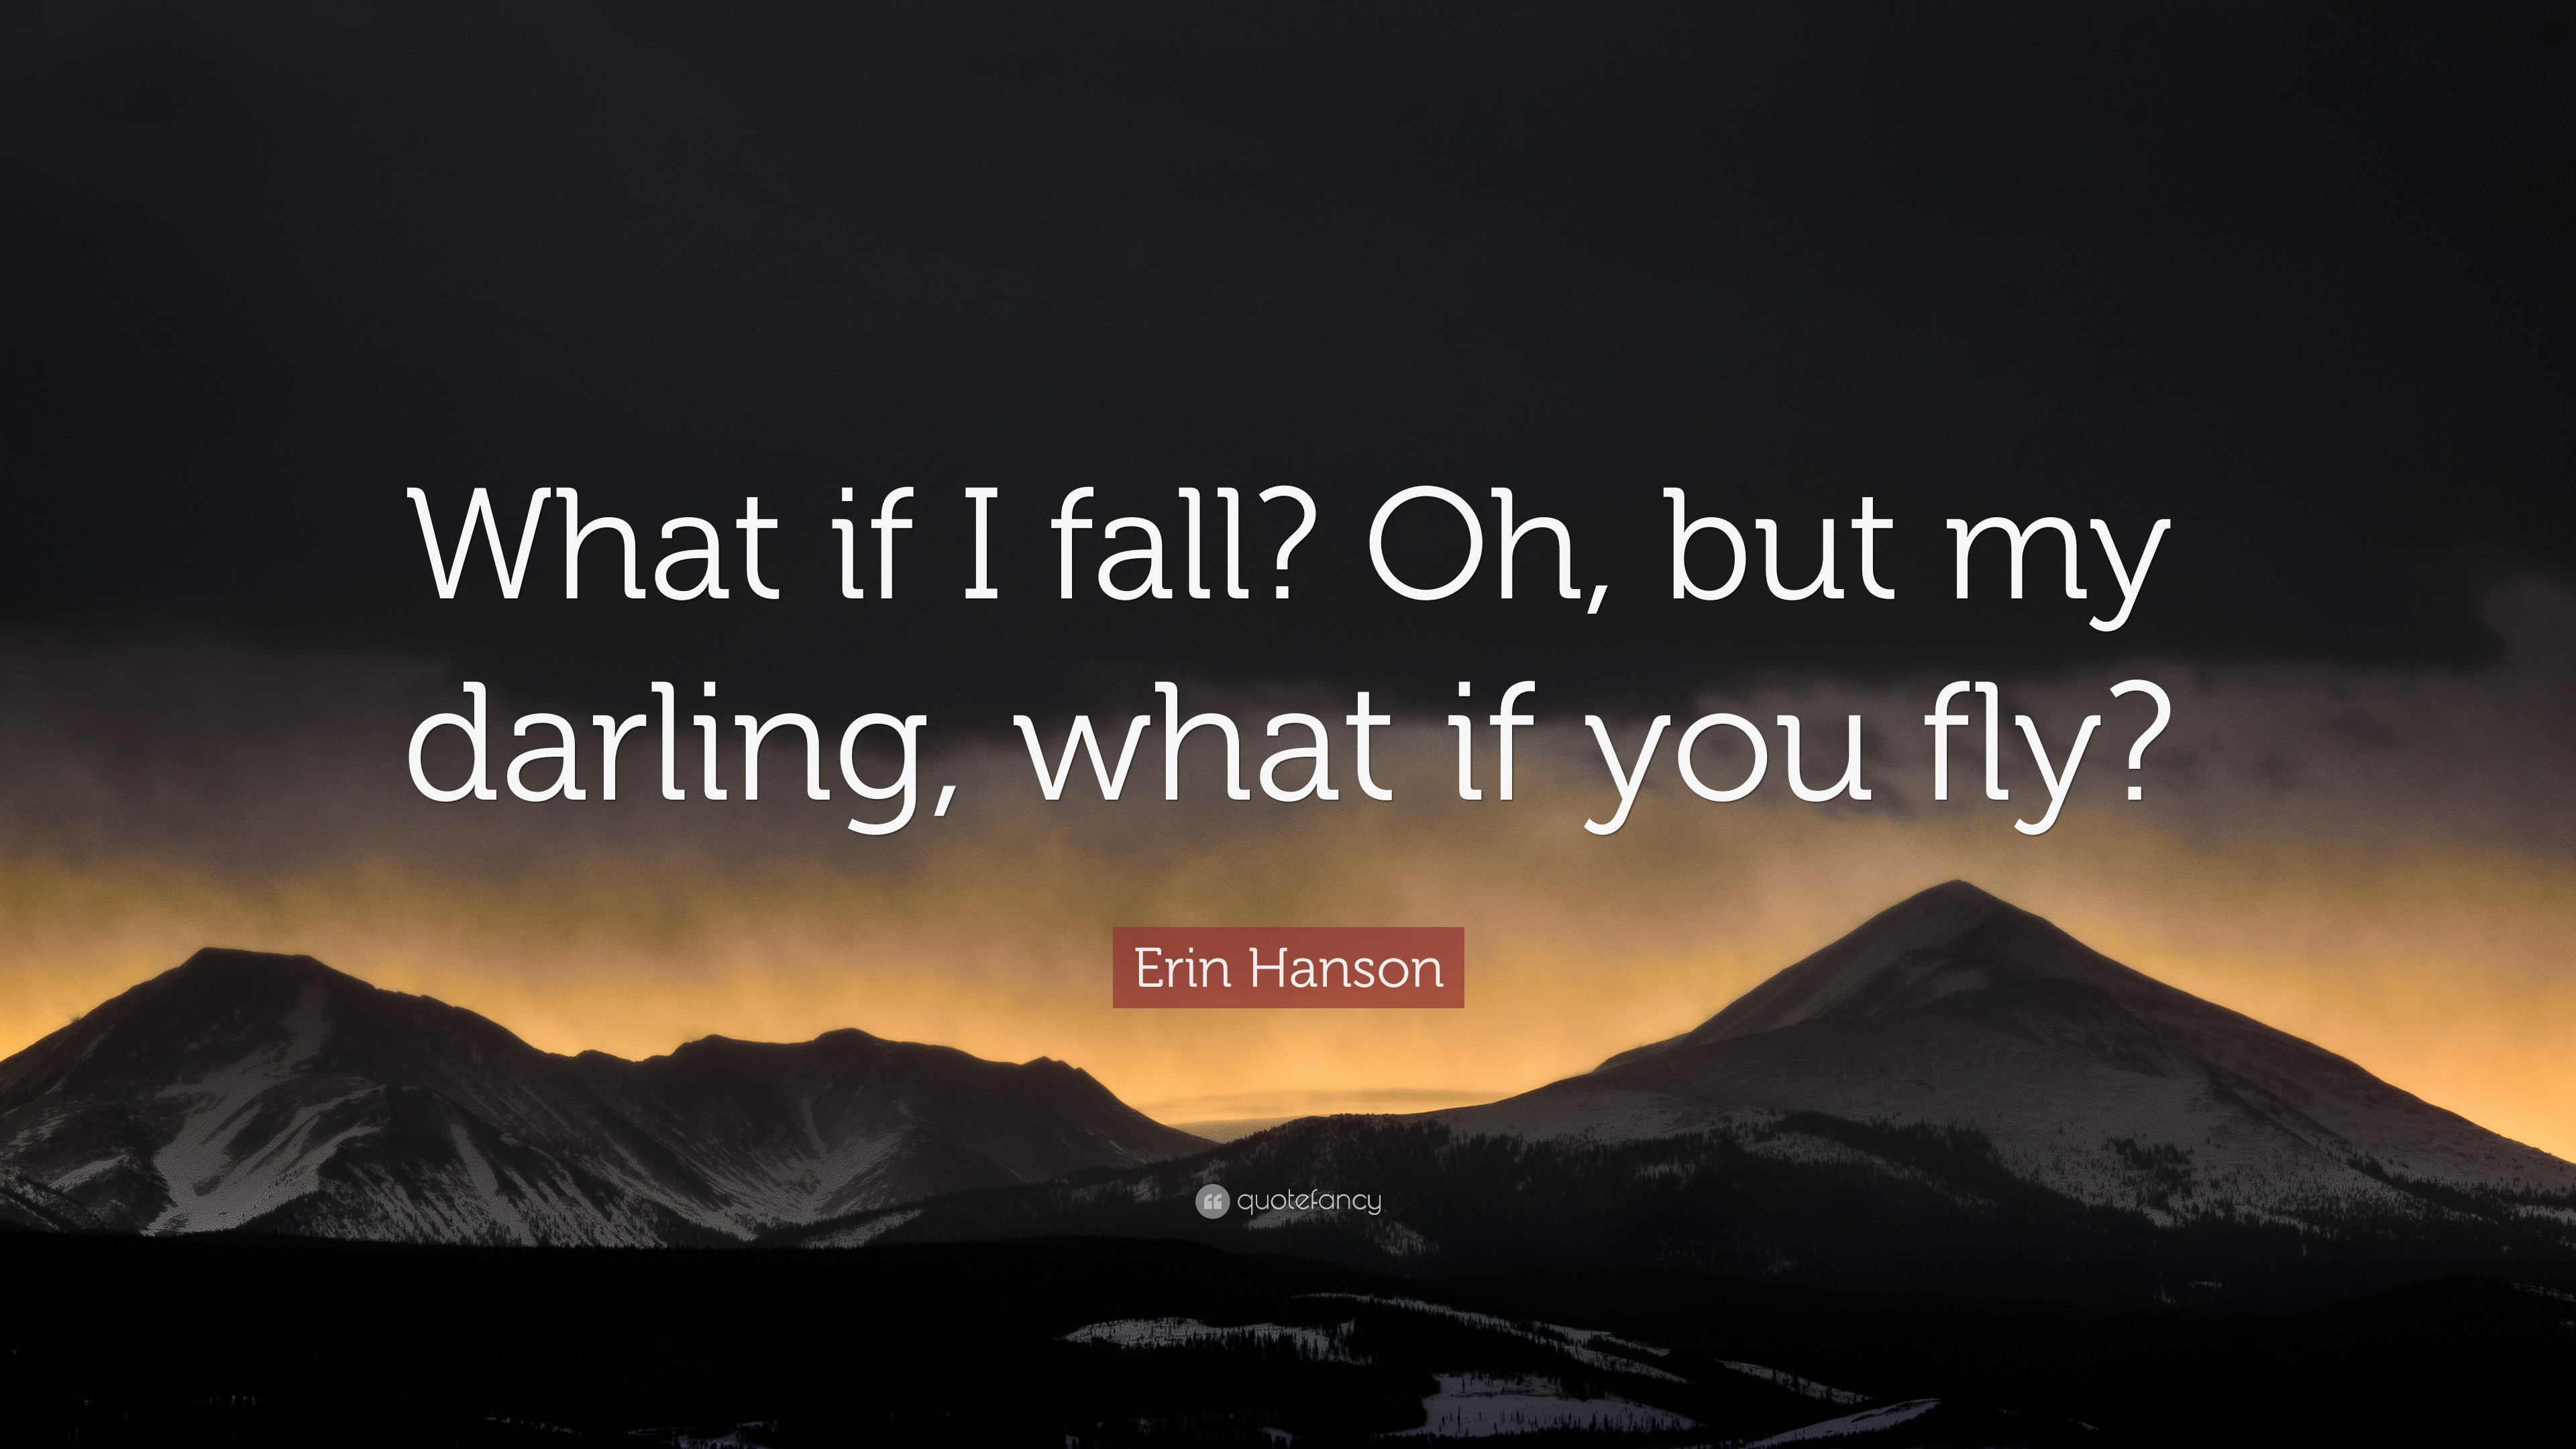 7068606-Erin-Hanson-Quote-What-if-I-fall